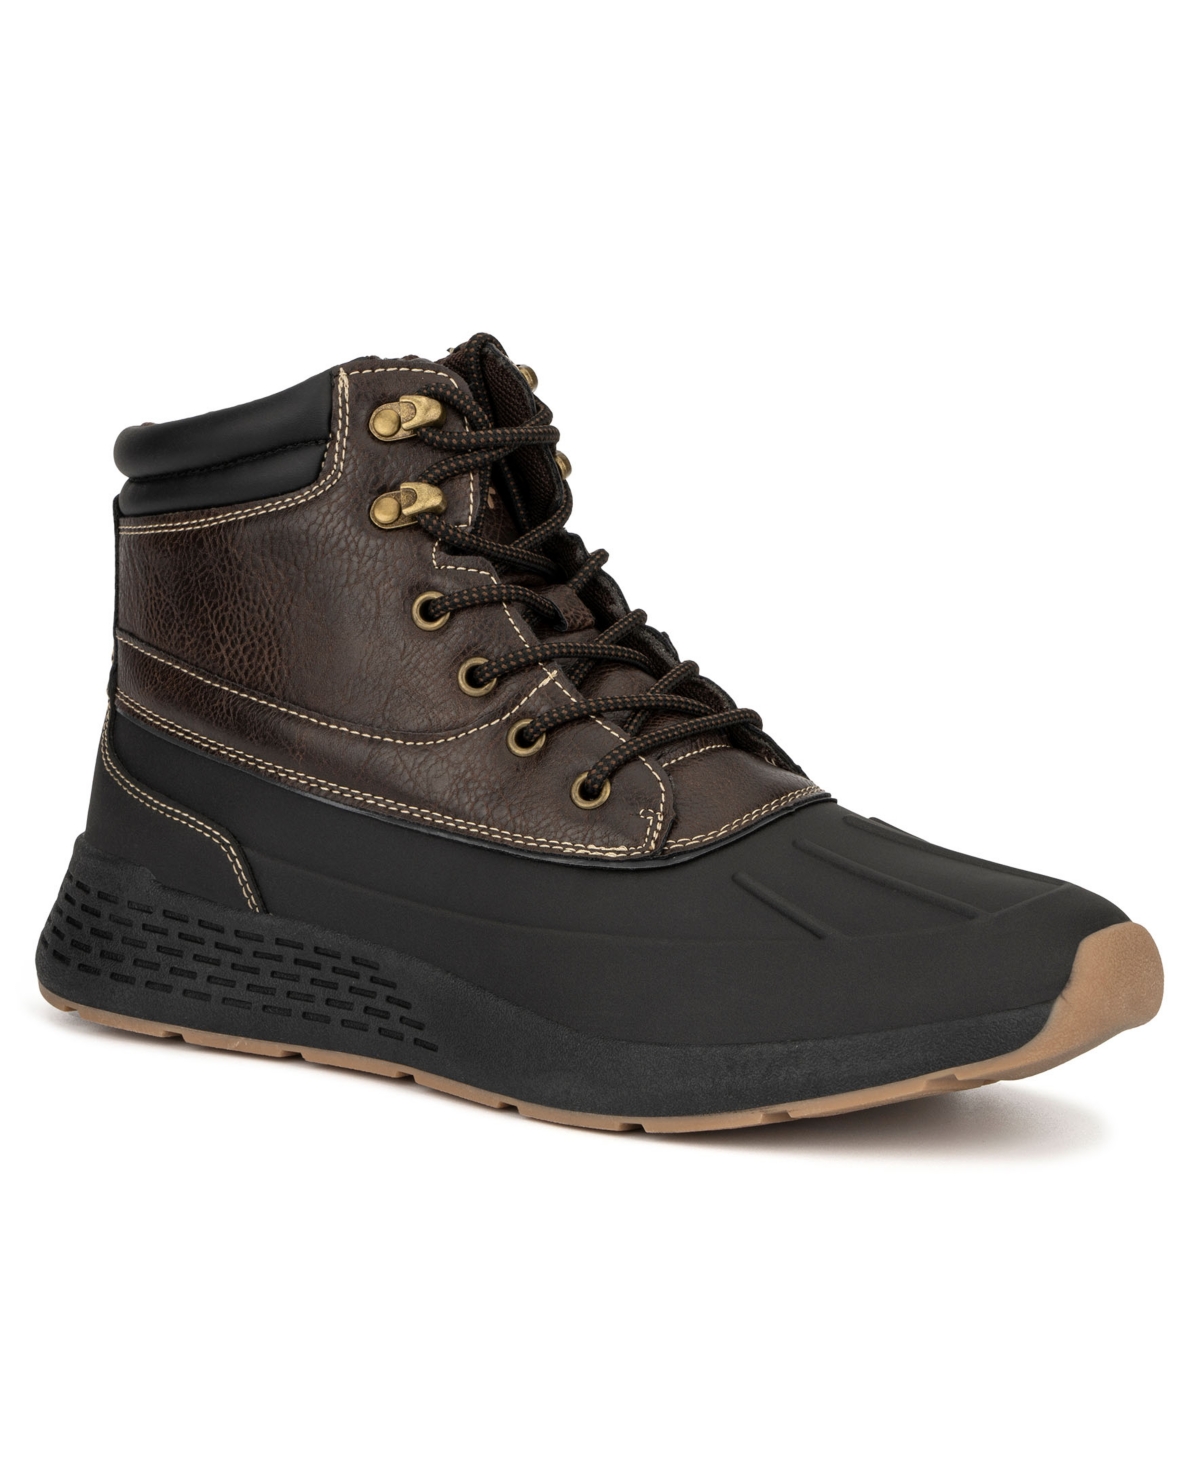 Reserved Footwear Mens Cascade Work Boots Mens Shoes